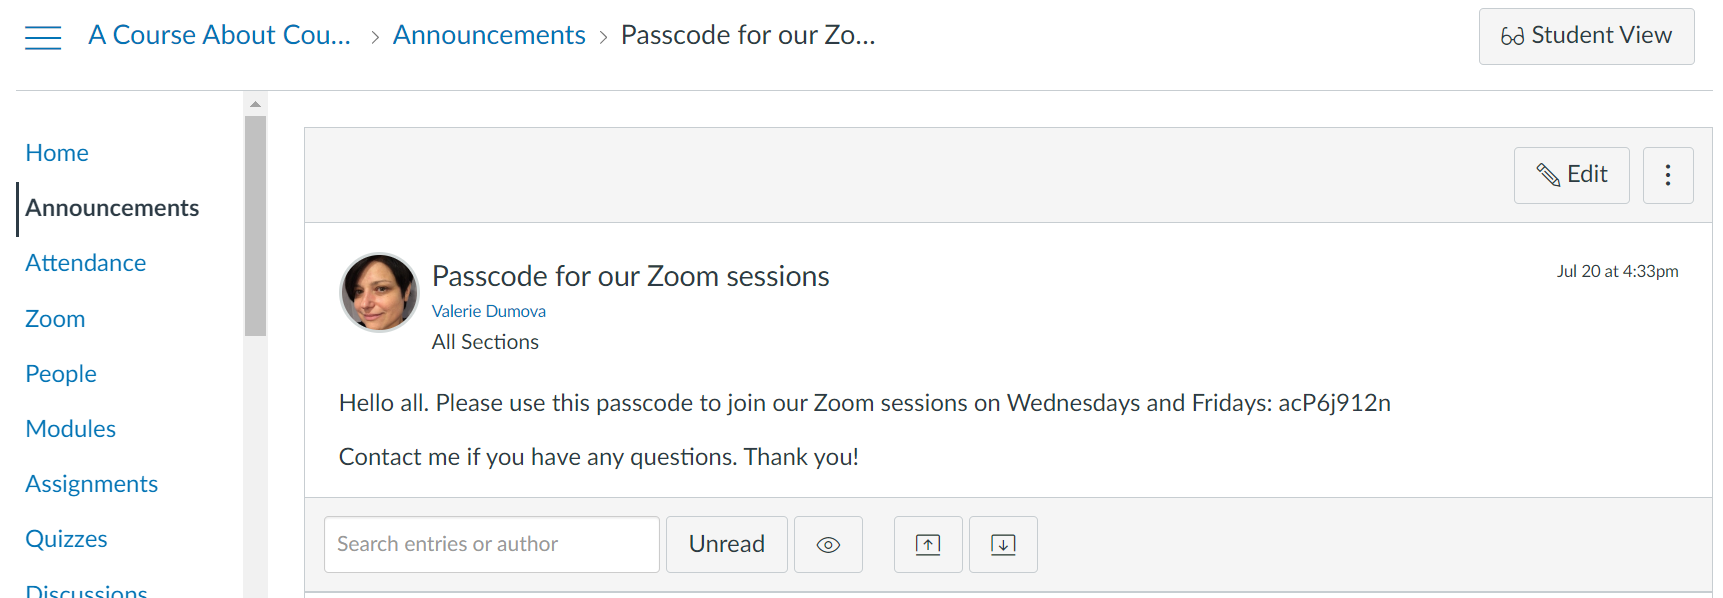 canvas message telling the students the meeting passcode